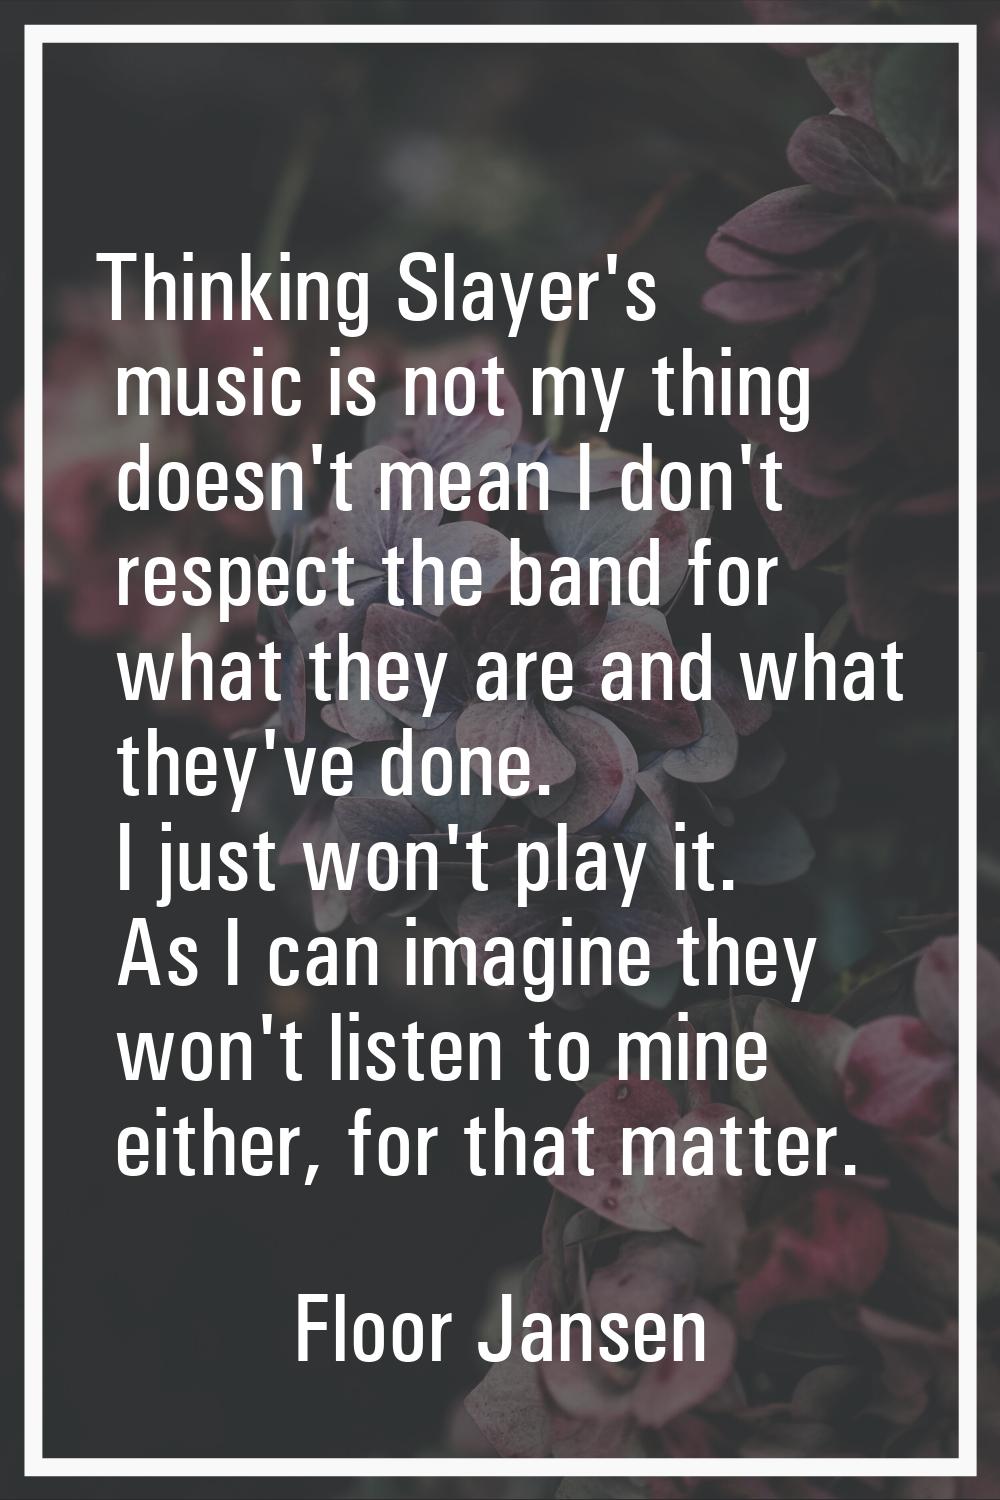 Thinking Slayer's music is not my thing doesn't mean I don't respect the band for what they are and